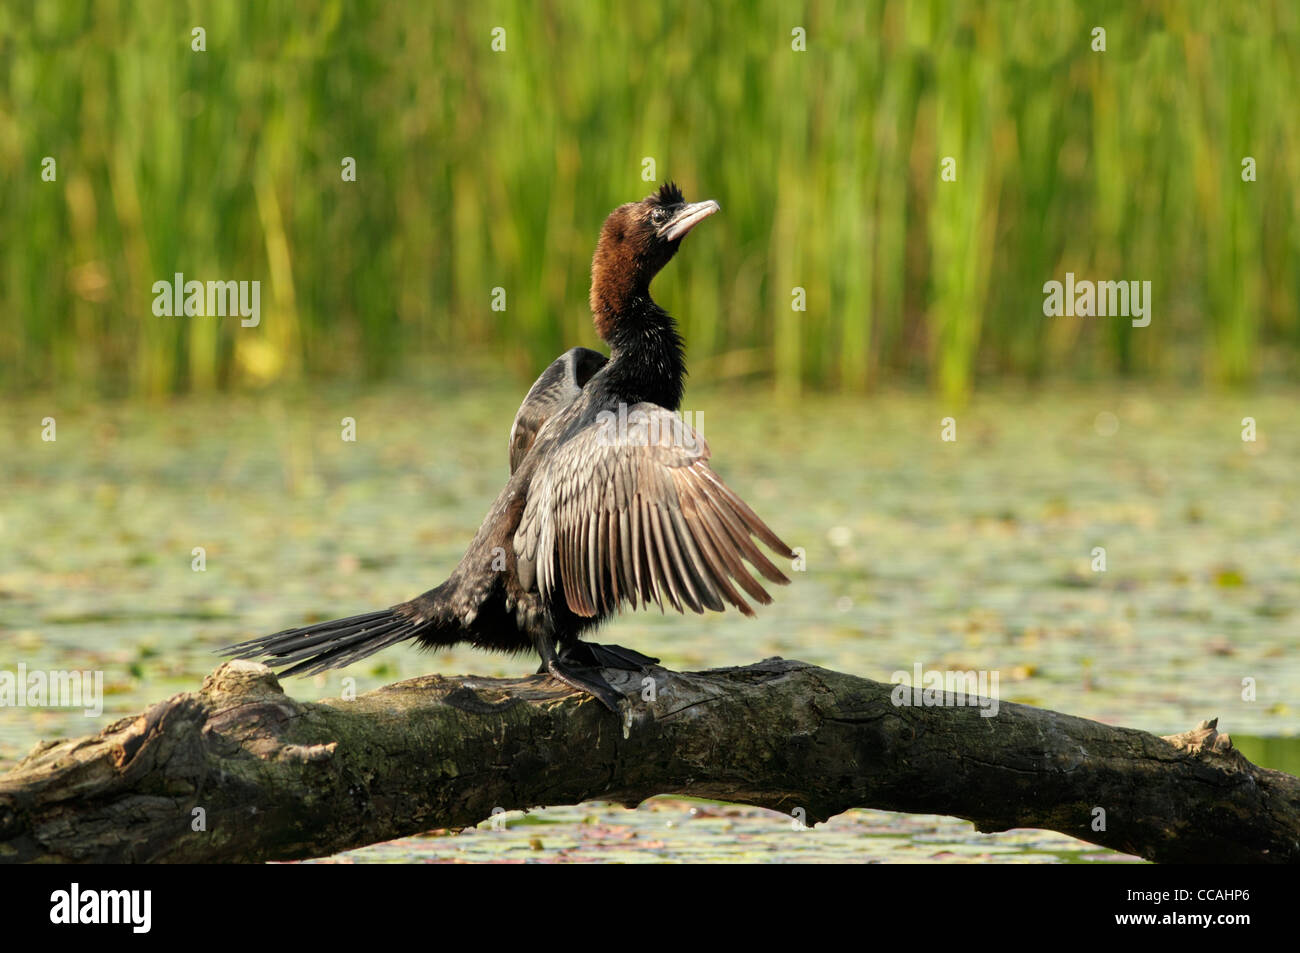 Pygmy cormorant (Phalacrocorax pygmeus) perched on a small log over water with reeds behind. Side view with wings outstretched Stock Photo